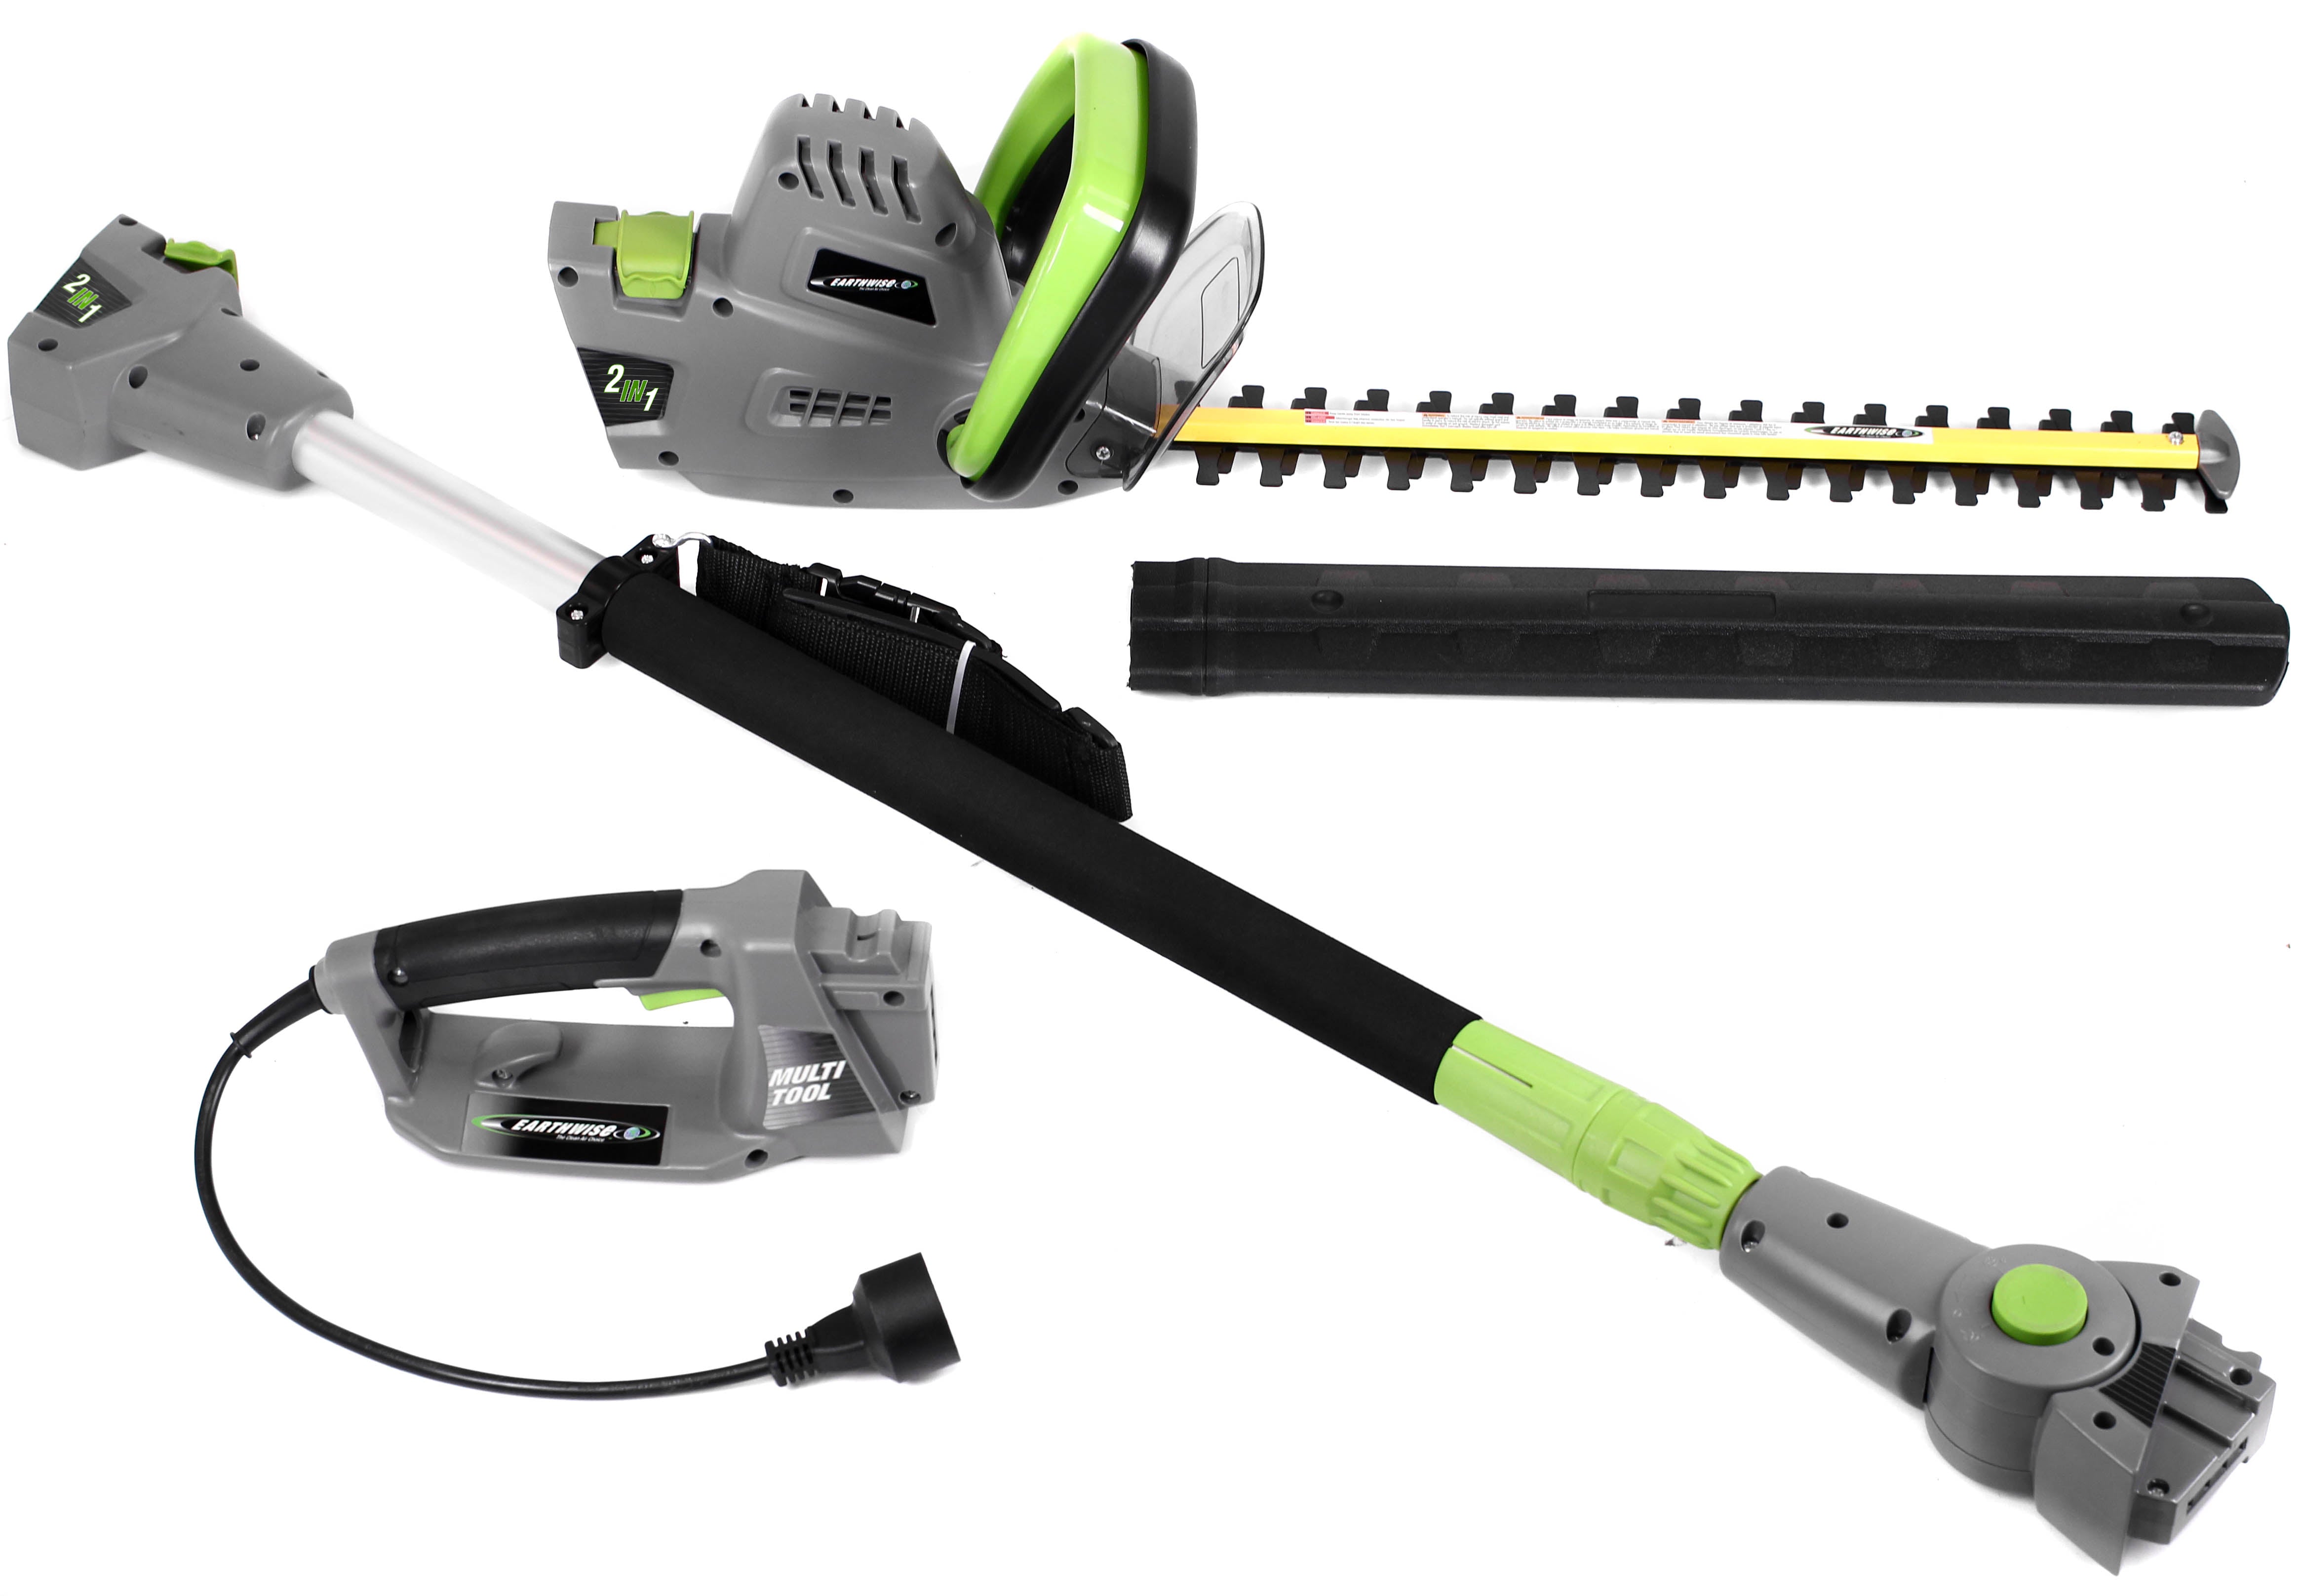 Earthwise Power Tools by ALM 18" 4.5-Amp 120V Corded 2 in 1 Hedge Trimmer